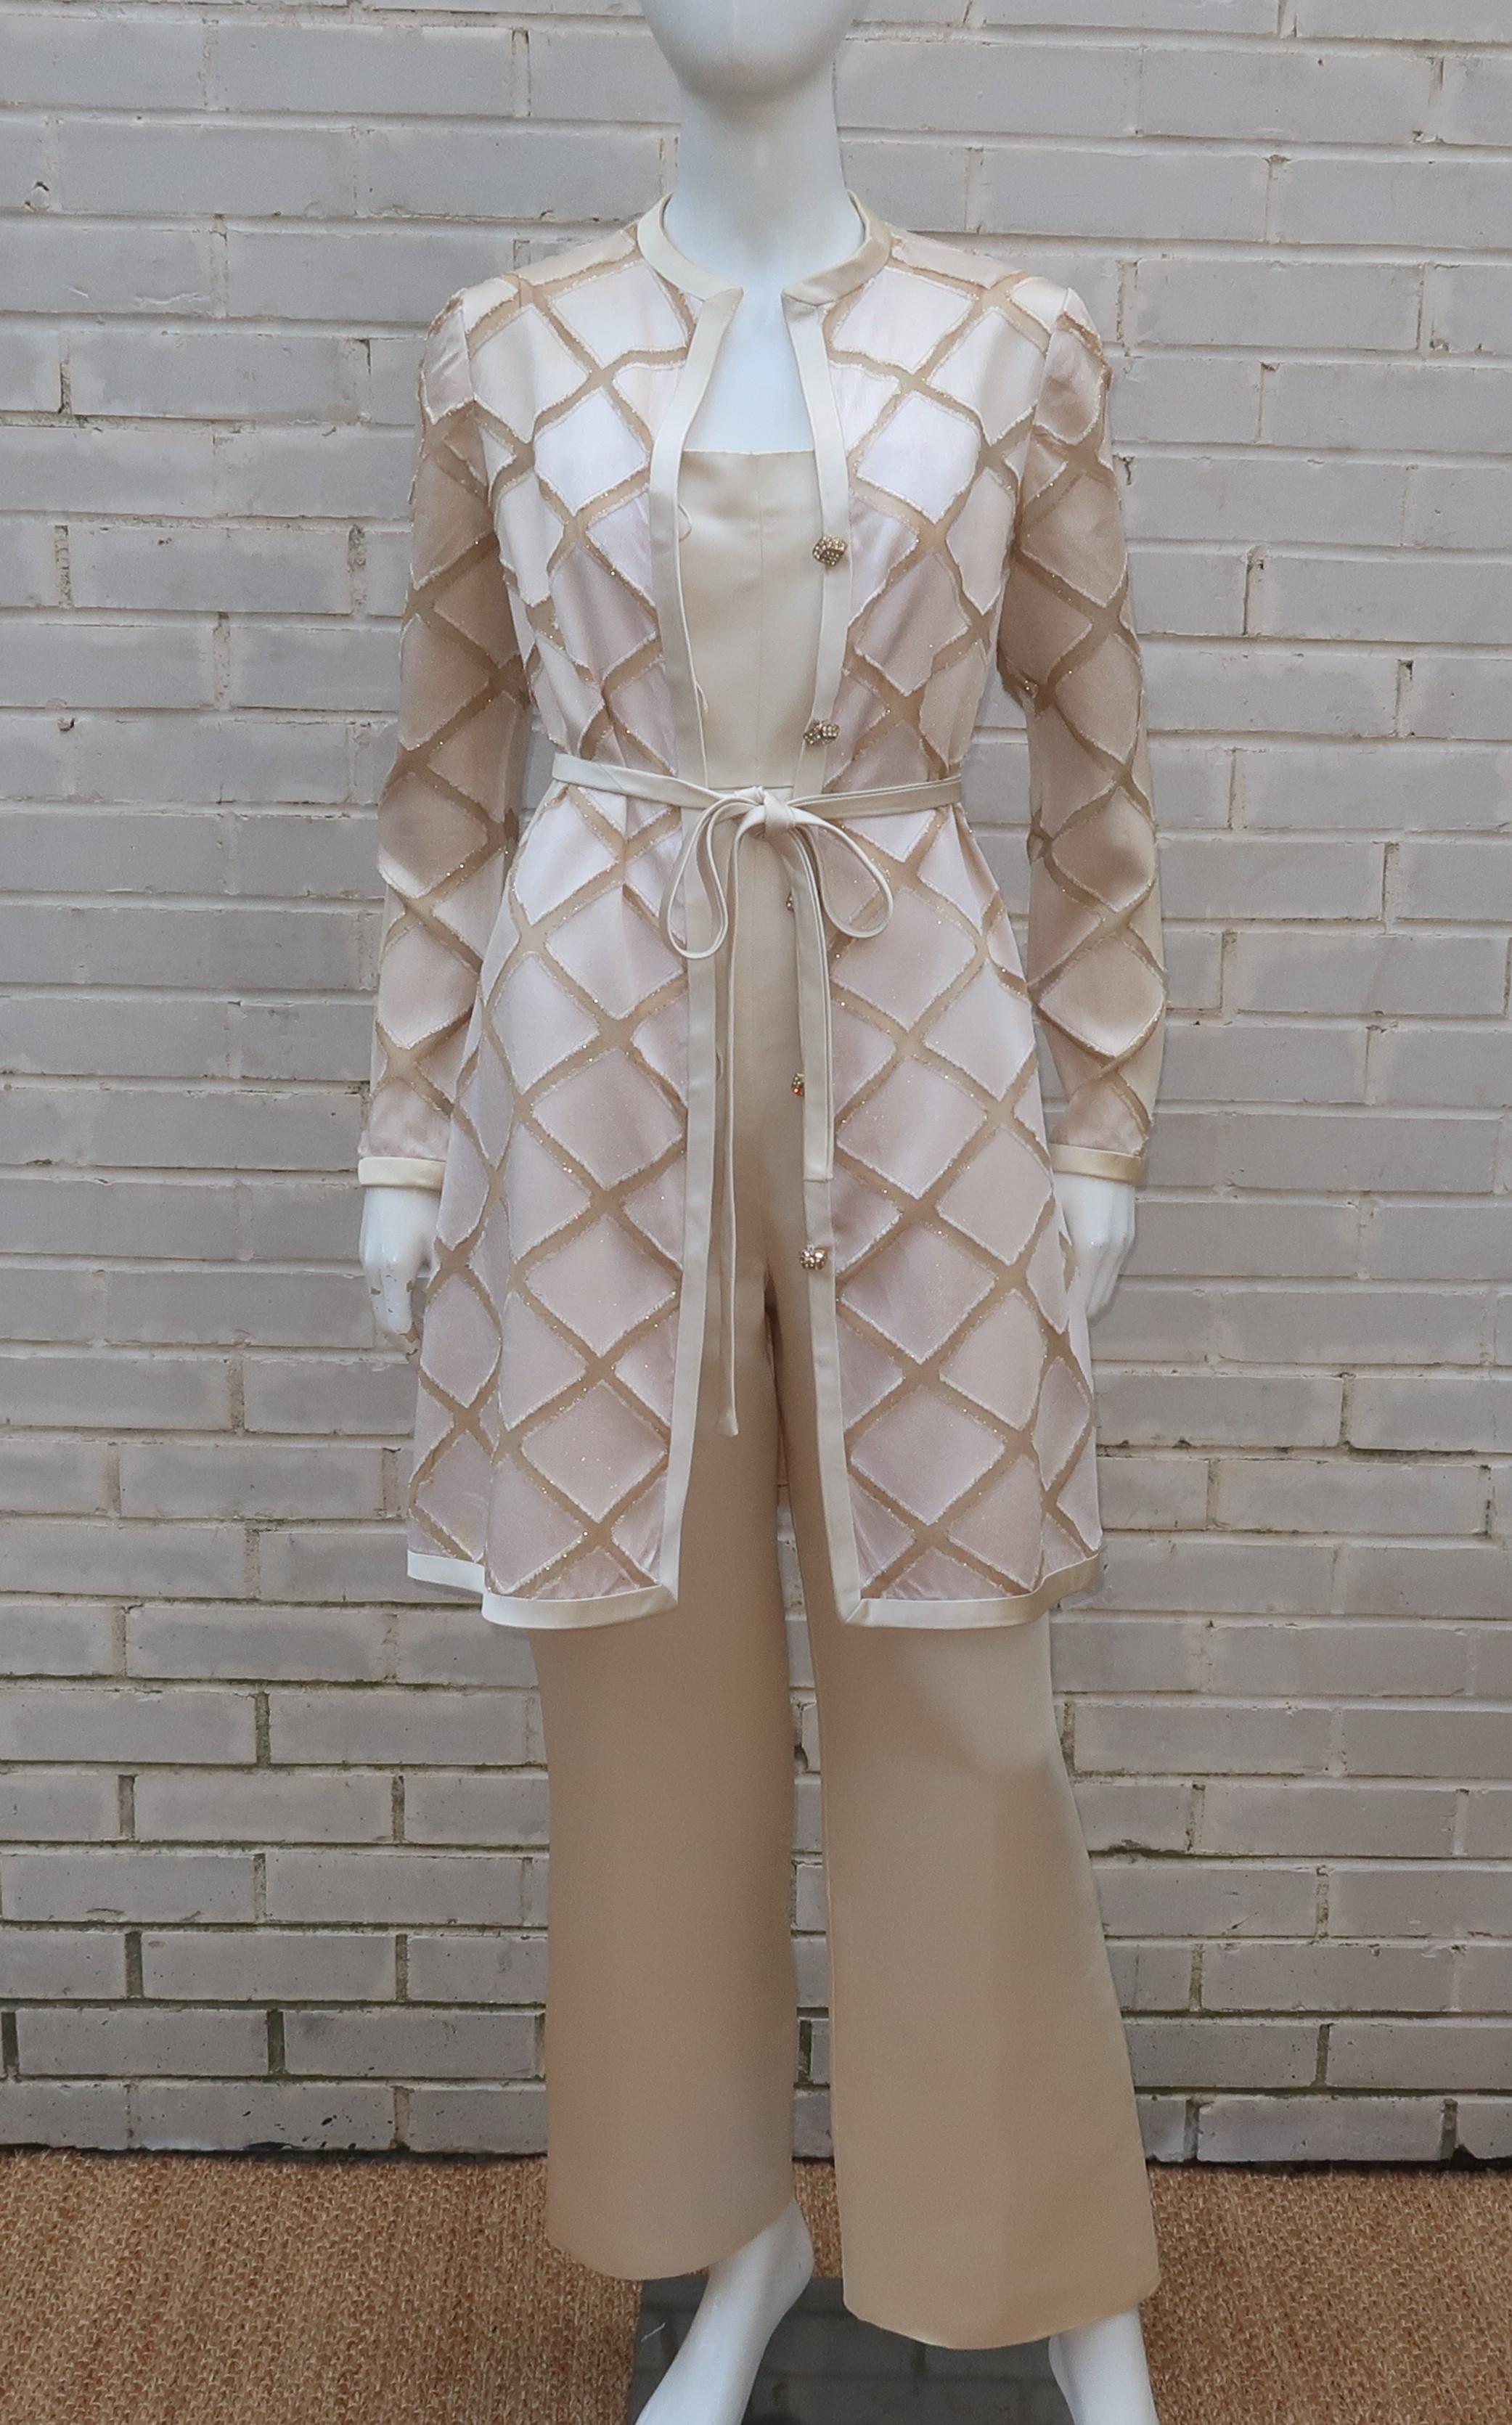 Brown Elinor Simmons for Malcolm Starr Satin Jumpsuit With Jacket, circa 1970